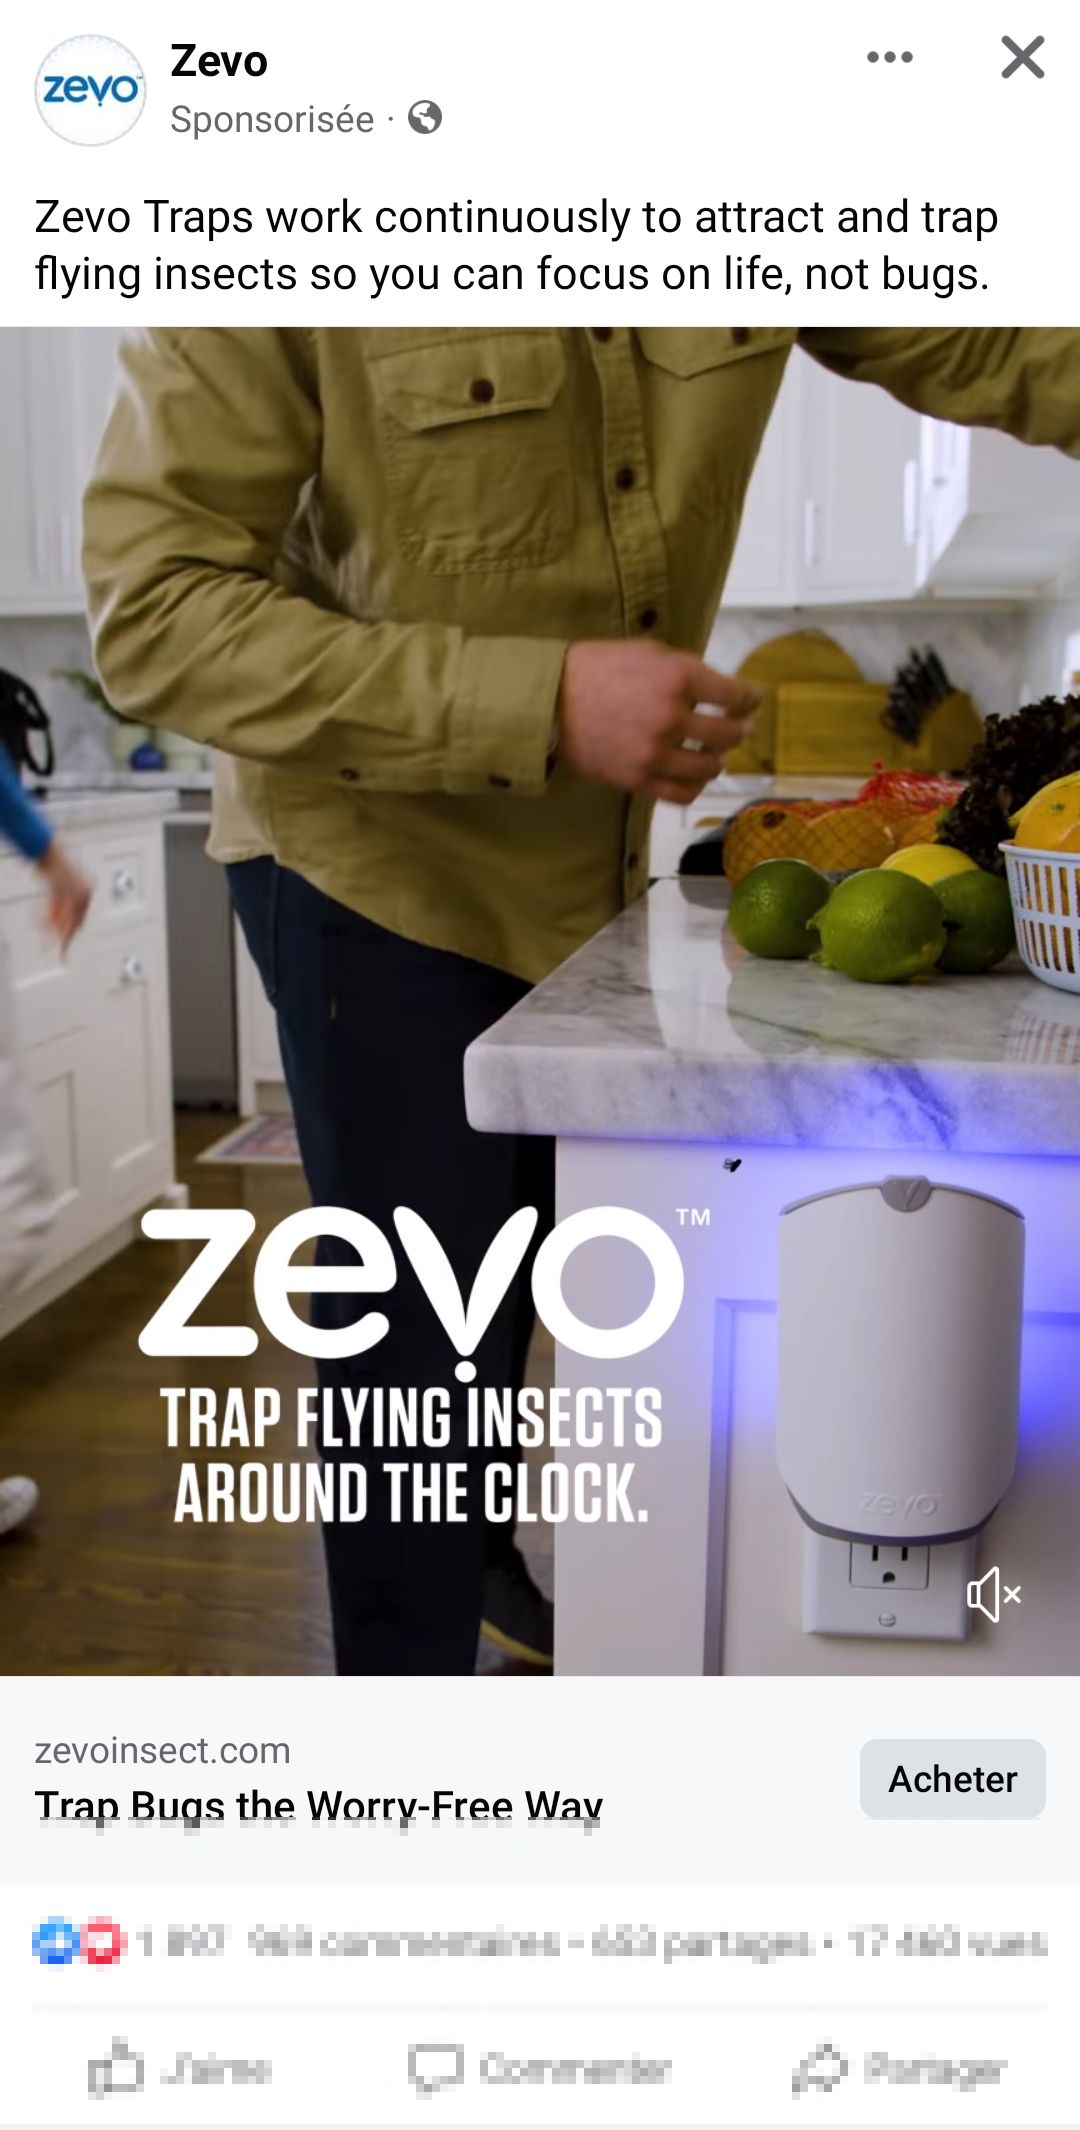 An ad of an electric flying insect trap device